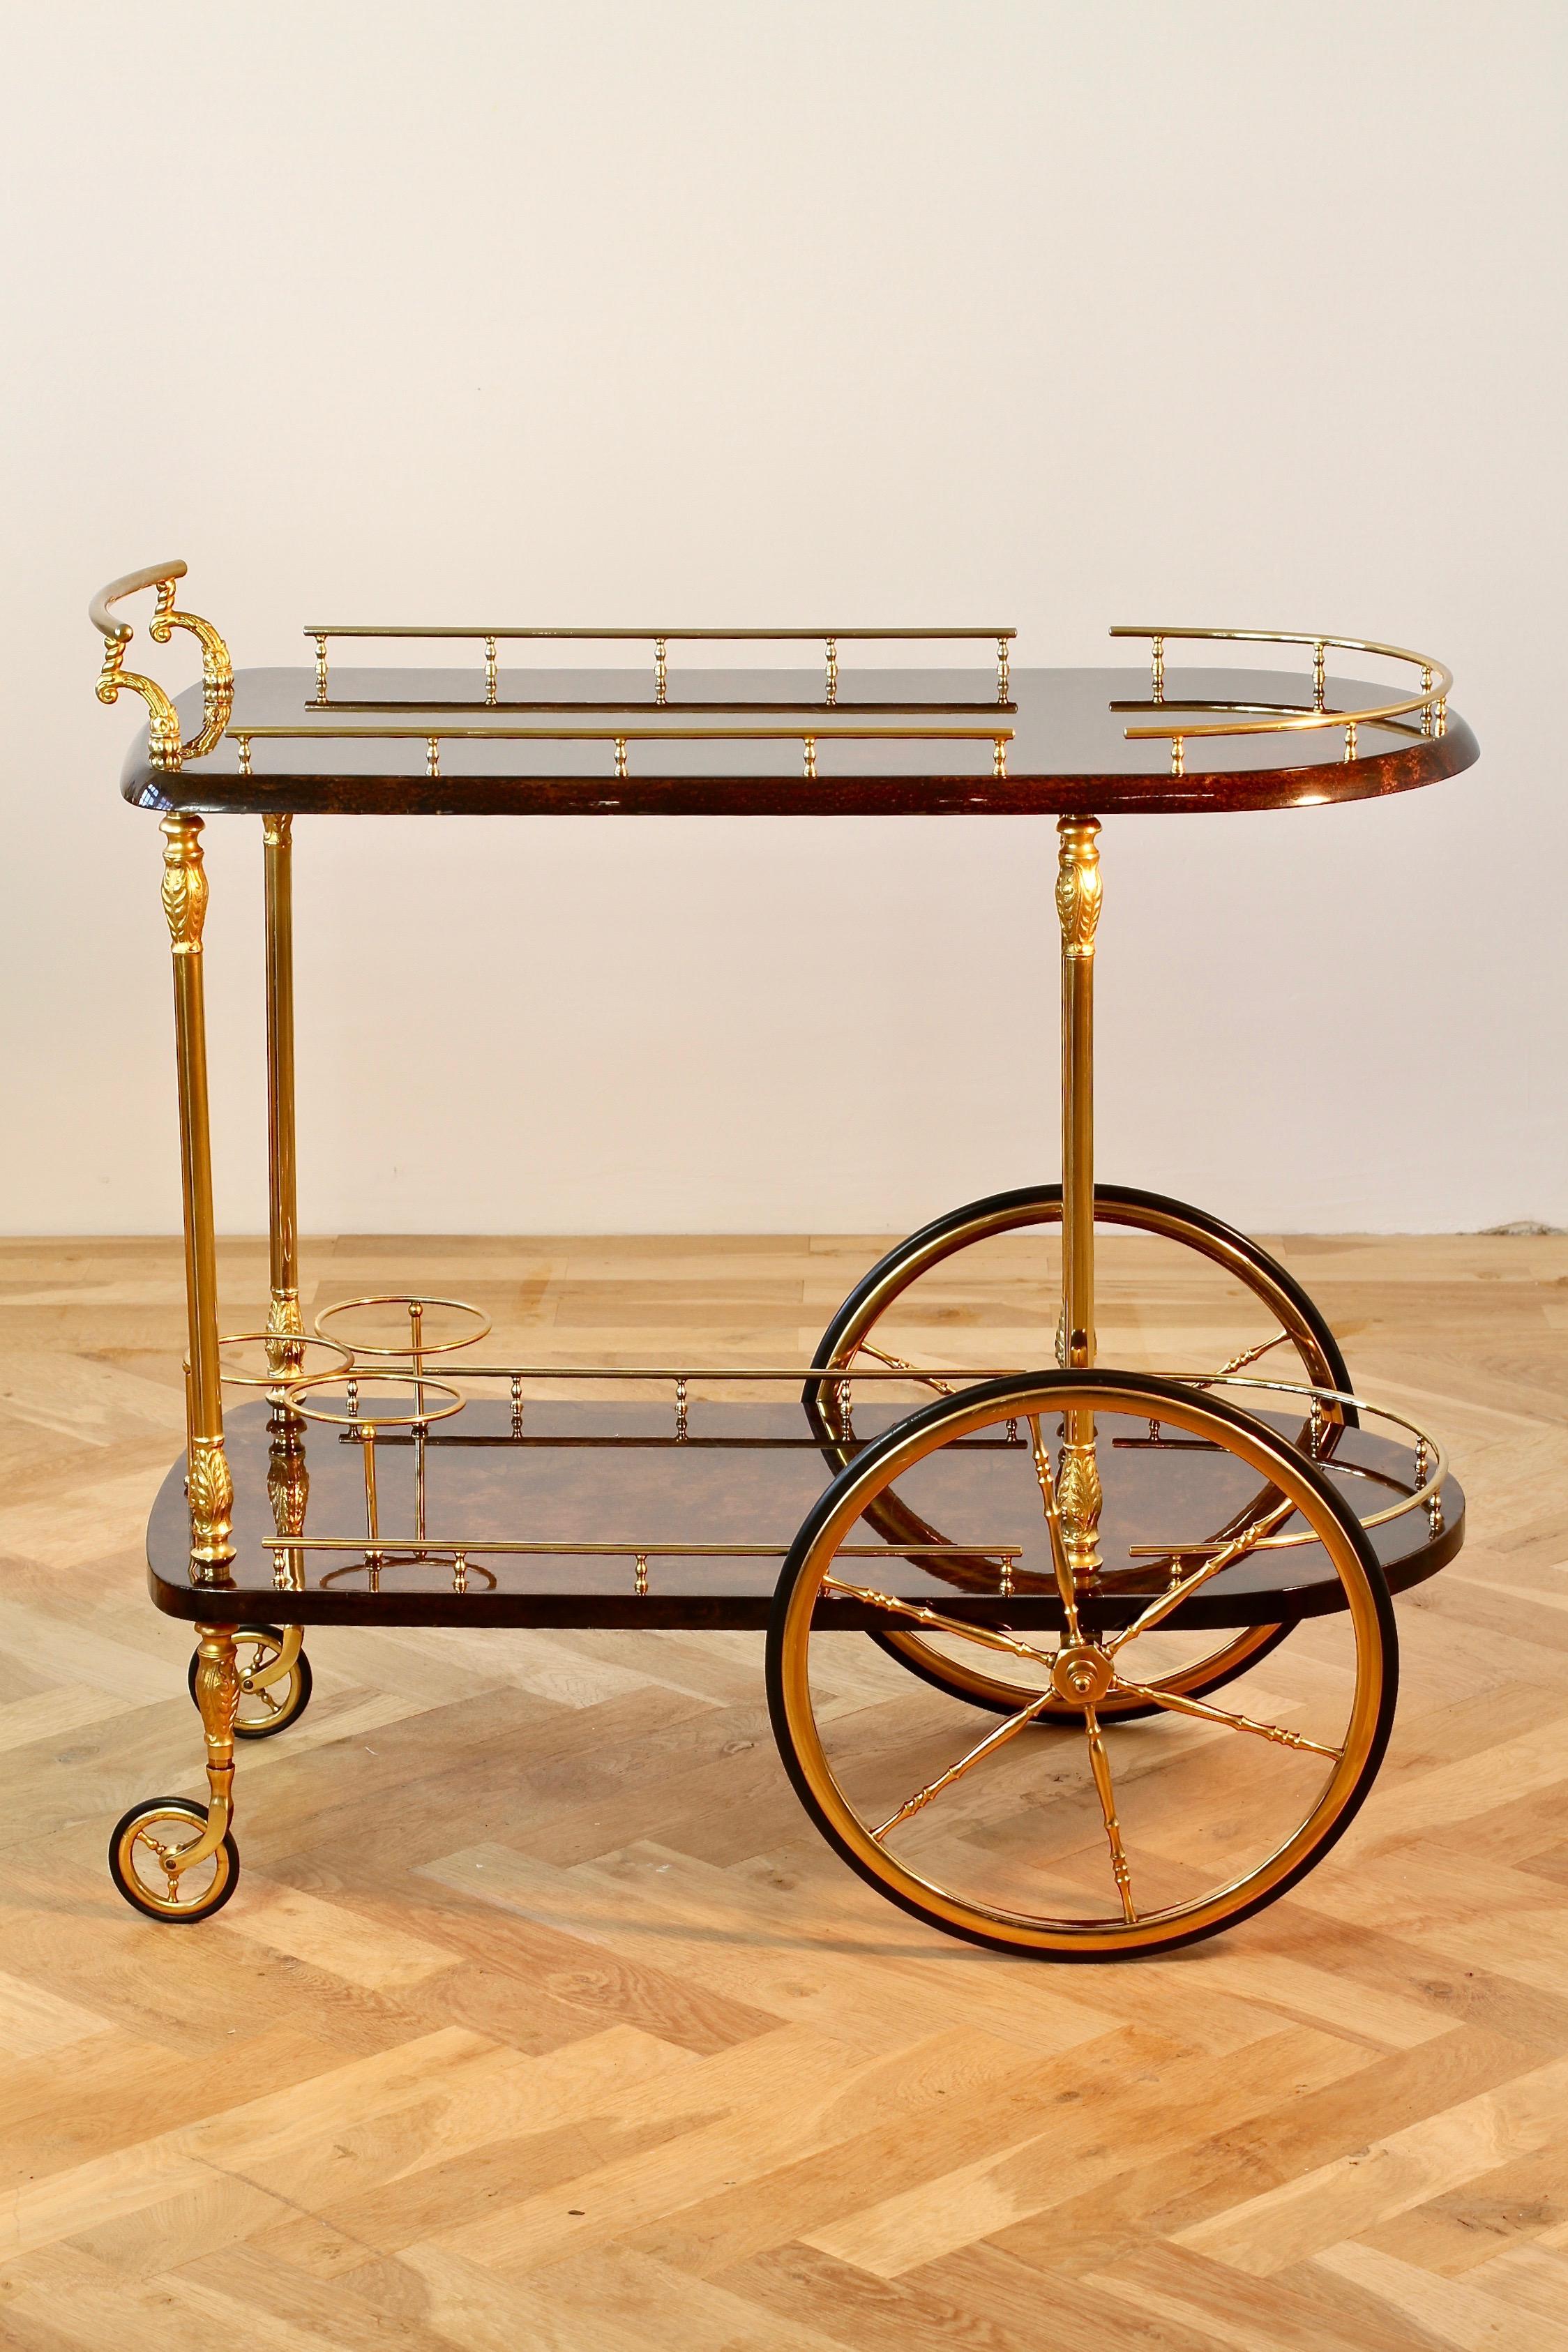 Large midcentury Italian 1960s bar cart, tea trolley or drinks stand Atelier Aldo Tura, Milan. Although unmarked, looking at the construction of this piece this would have been made after Aldo Tura's death by the Atelier Aldo Tura as it has all the